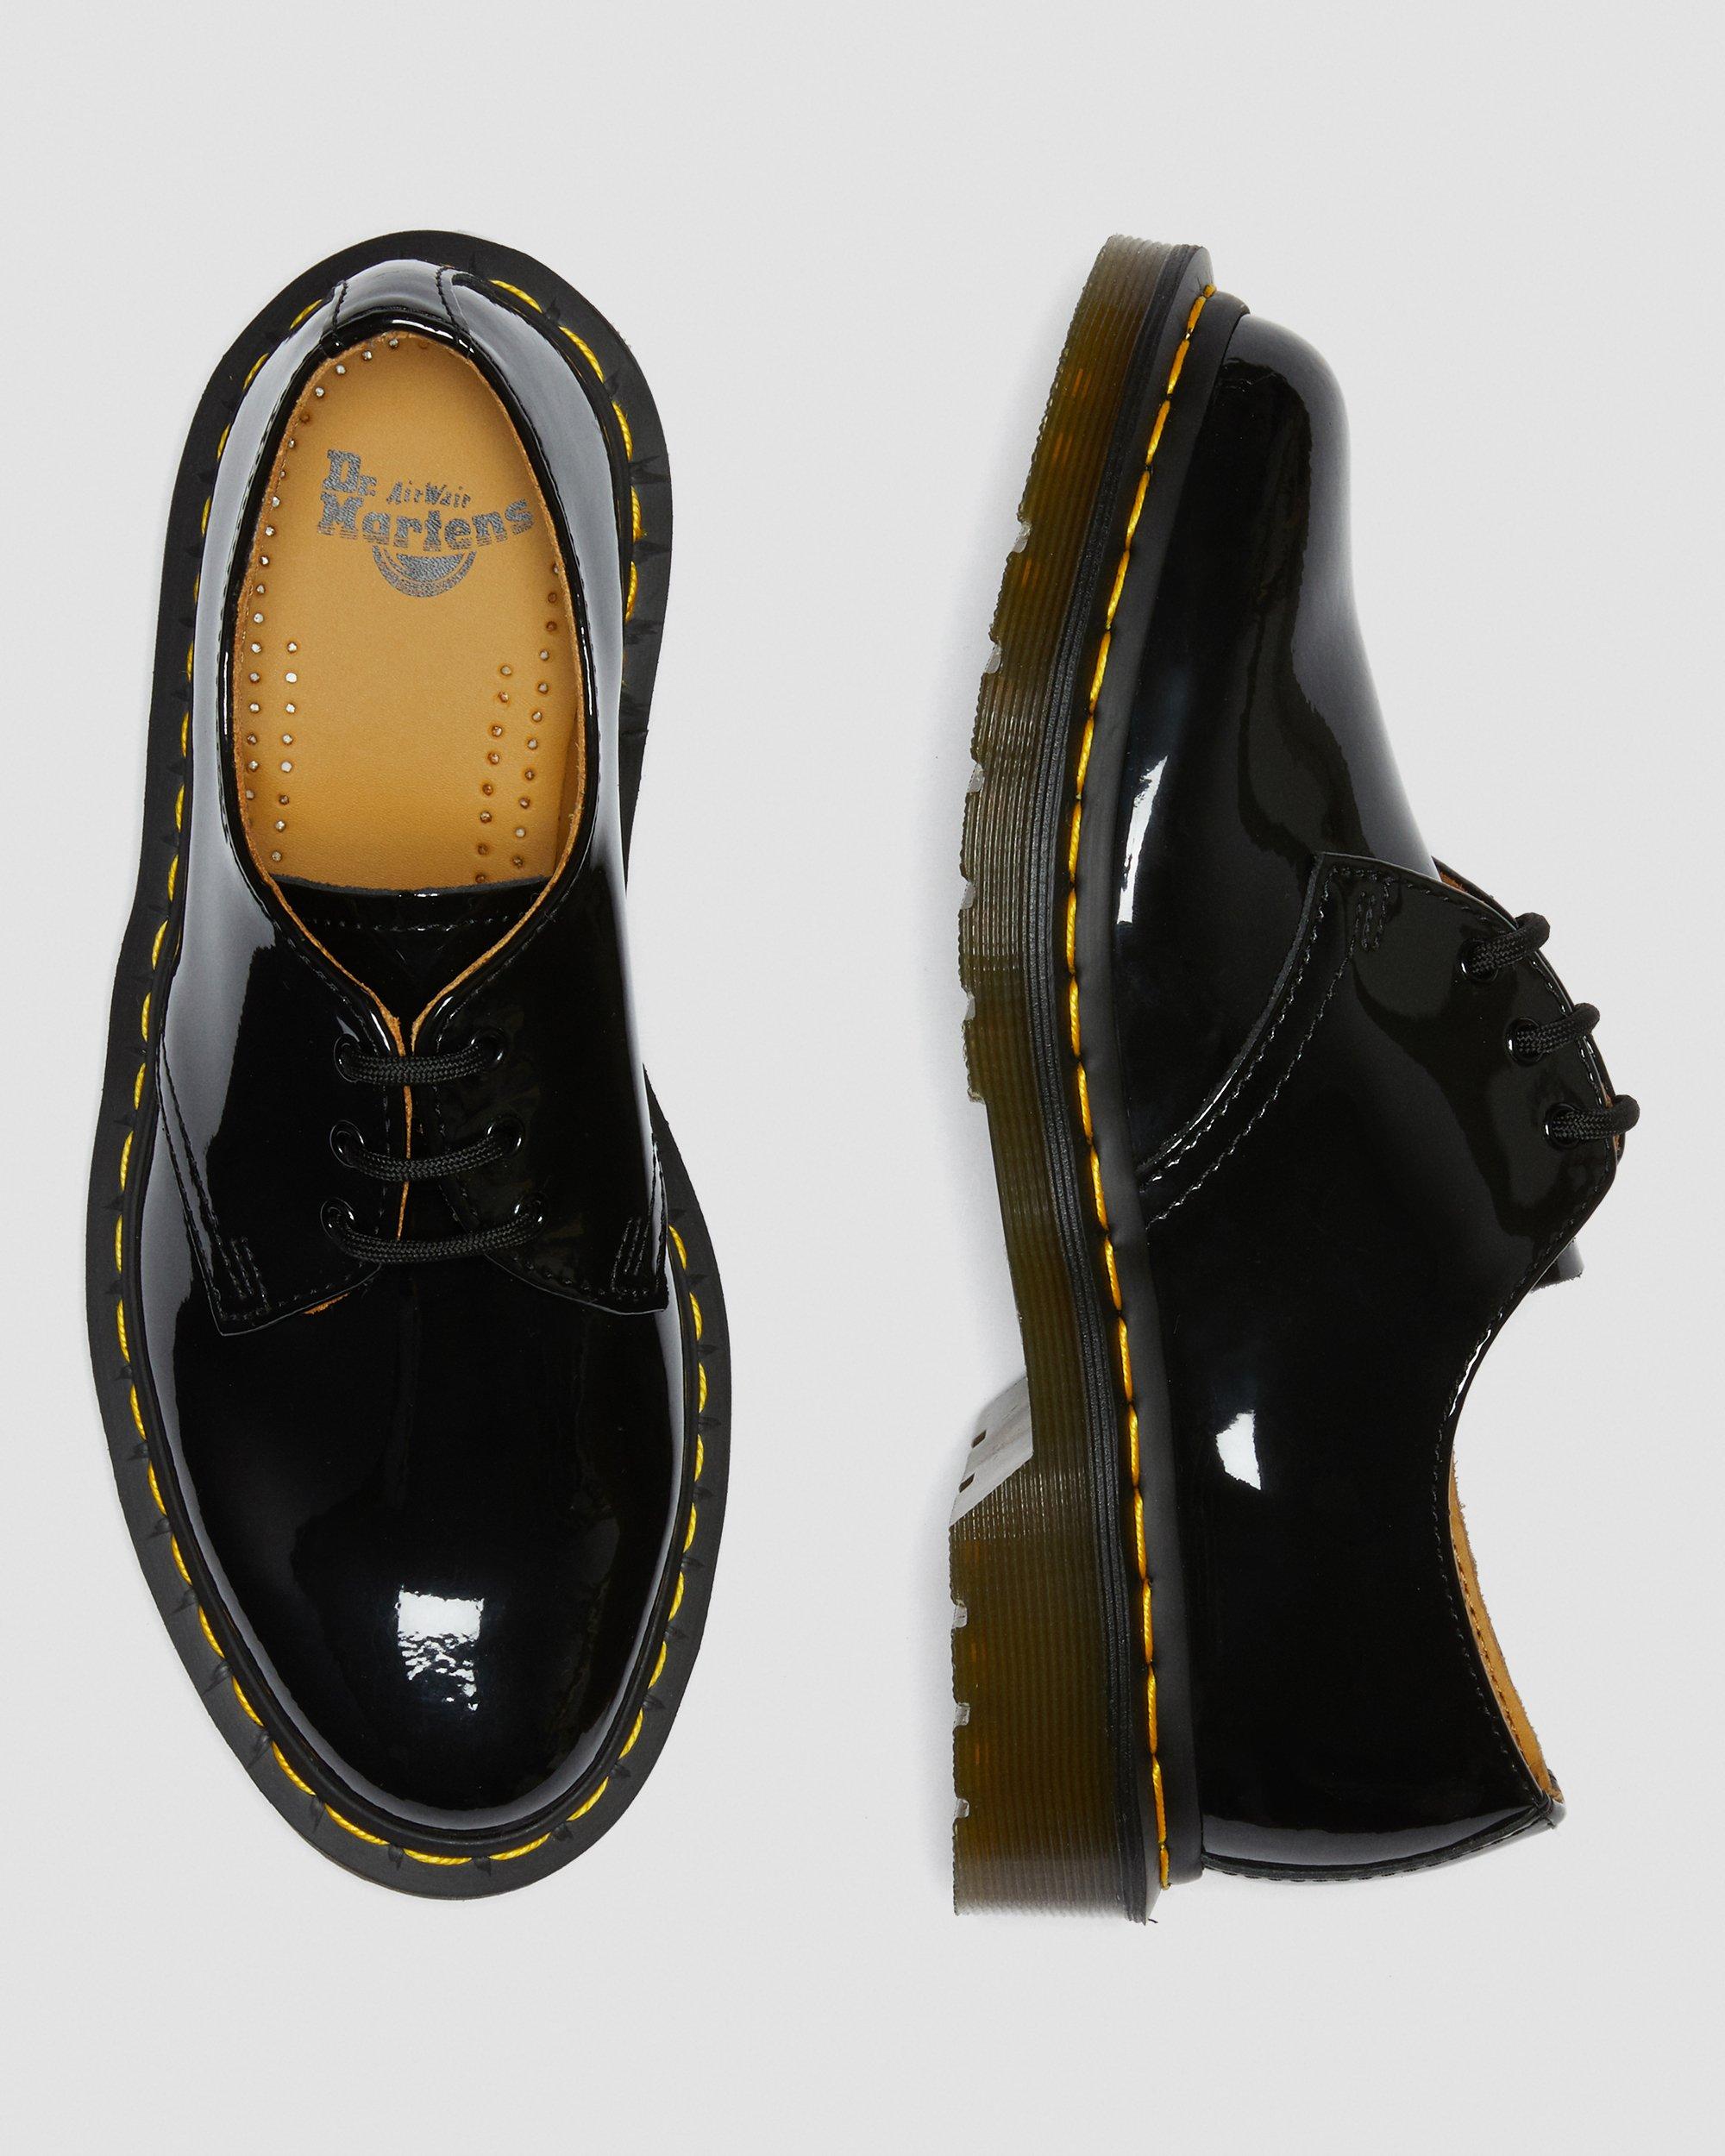 1461 Patent Leather Oxford Shoes1461 Patent Leather Oxford Shoes Dr. Martens